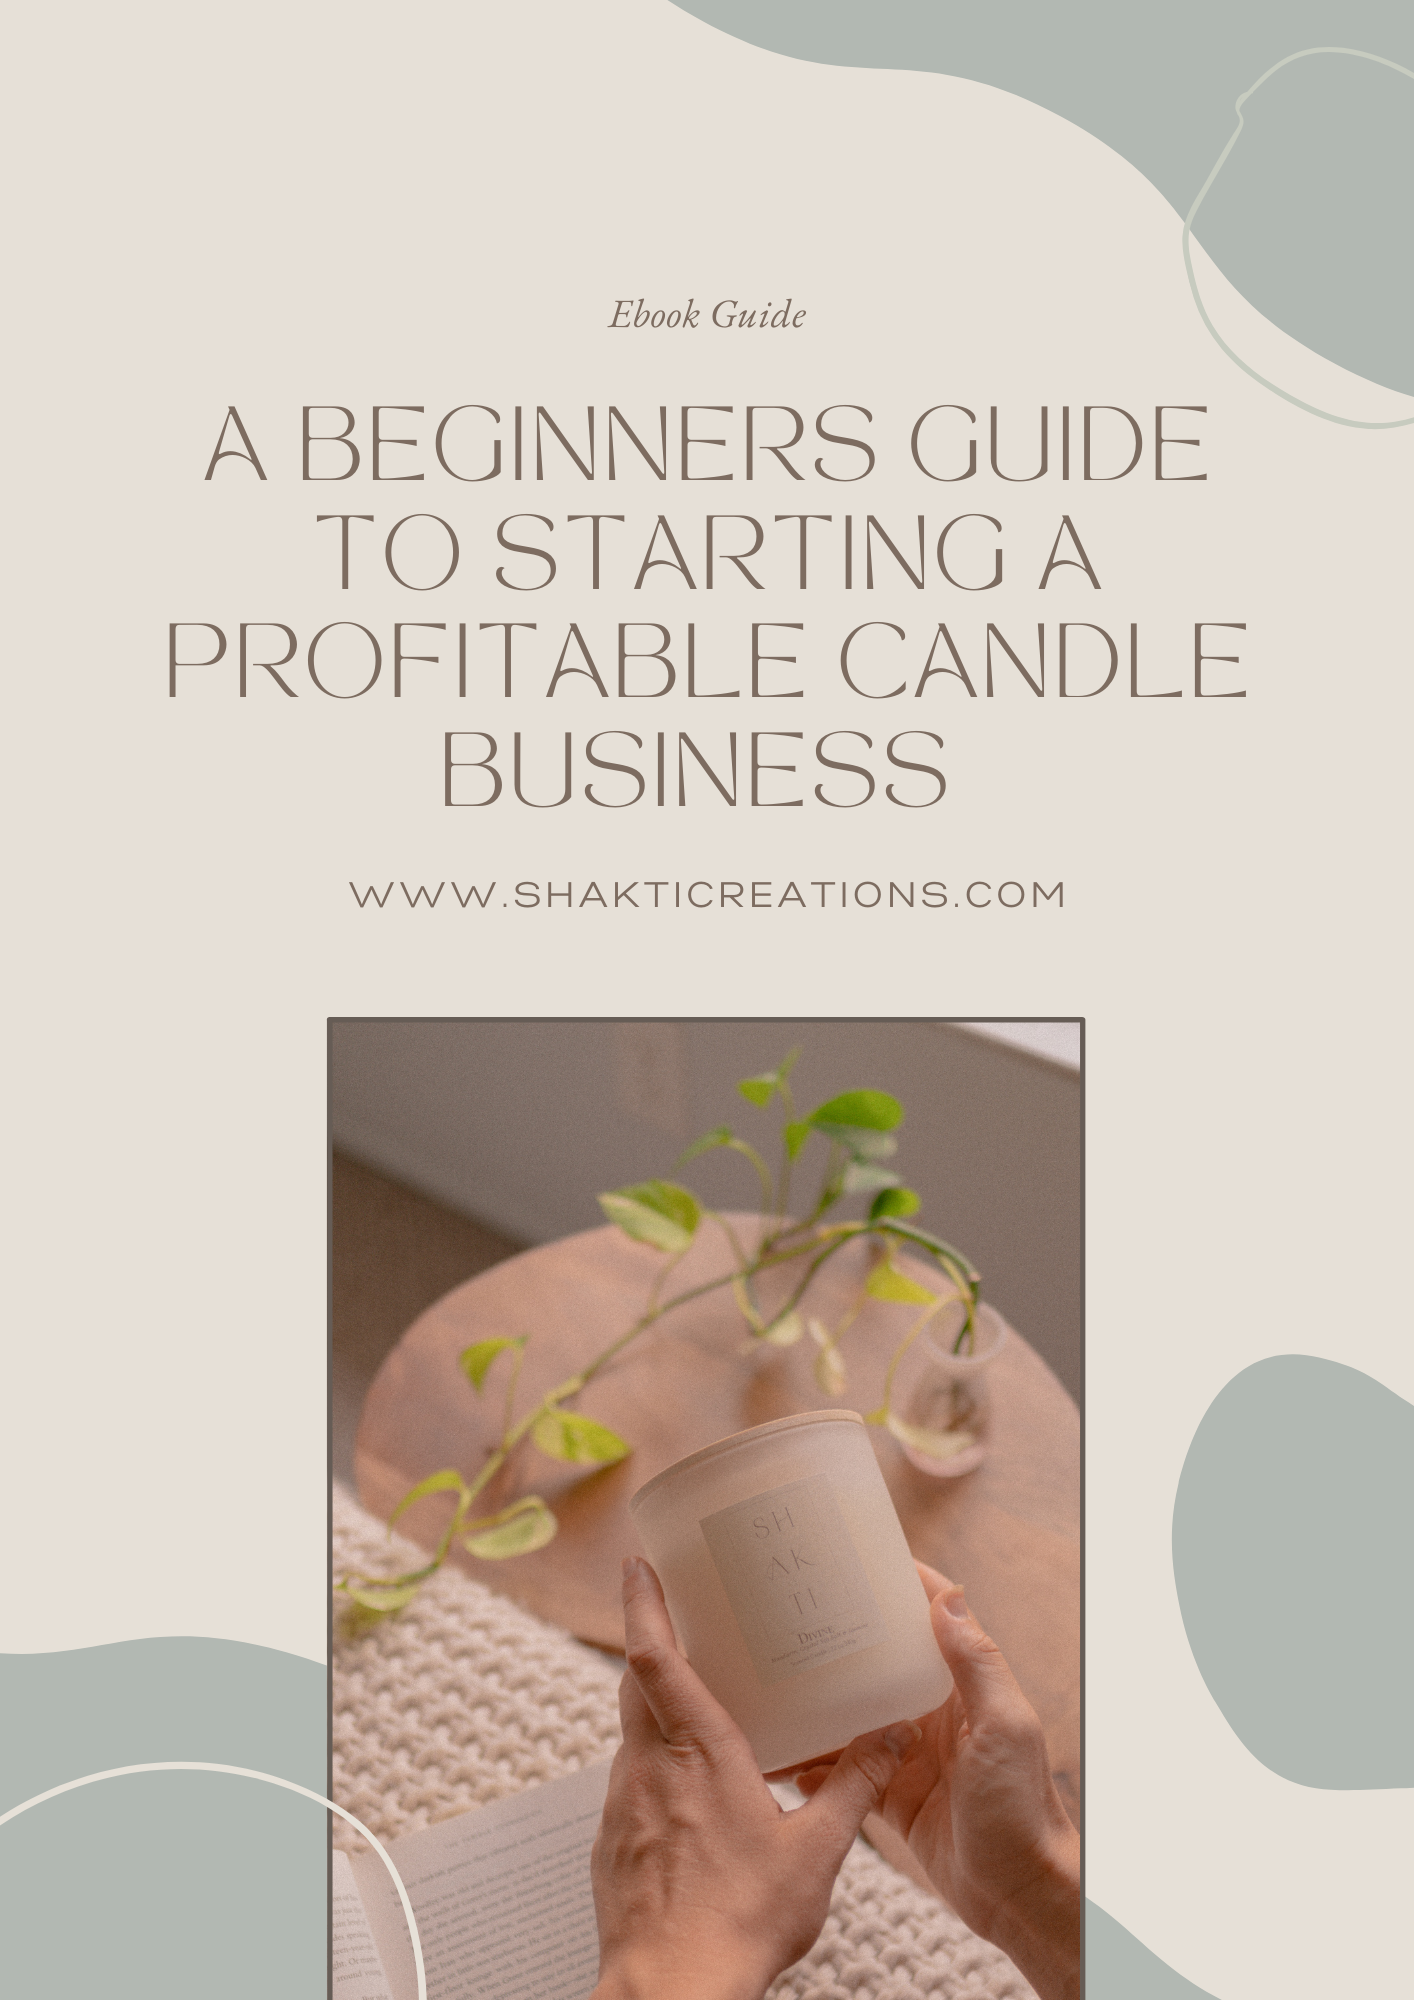 From Wax to Riches: A Beginner's Guide to Starting a Profitable Candle Business